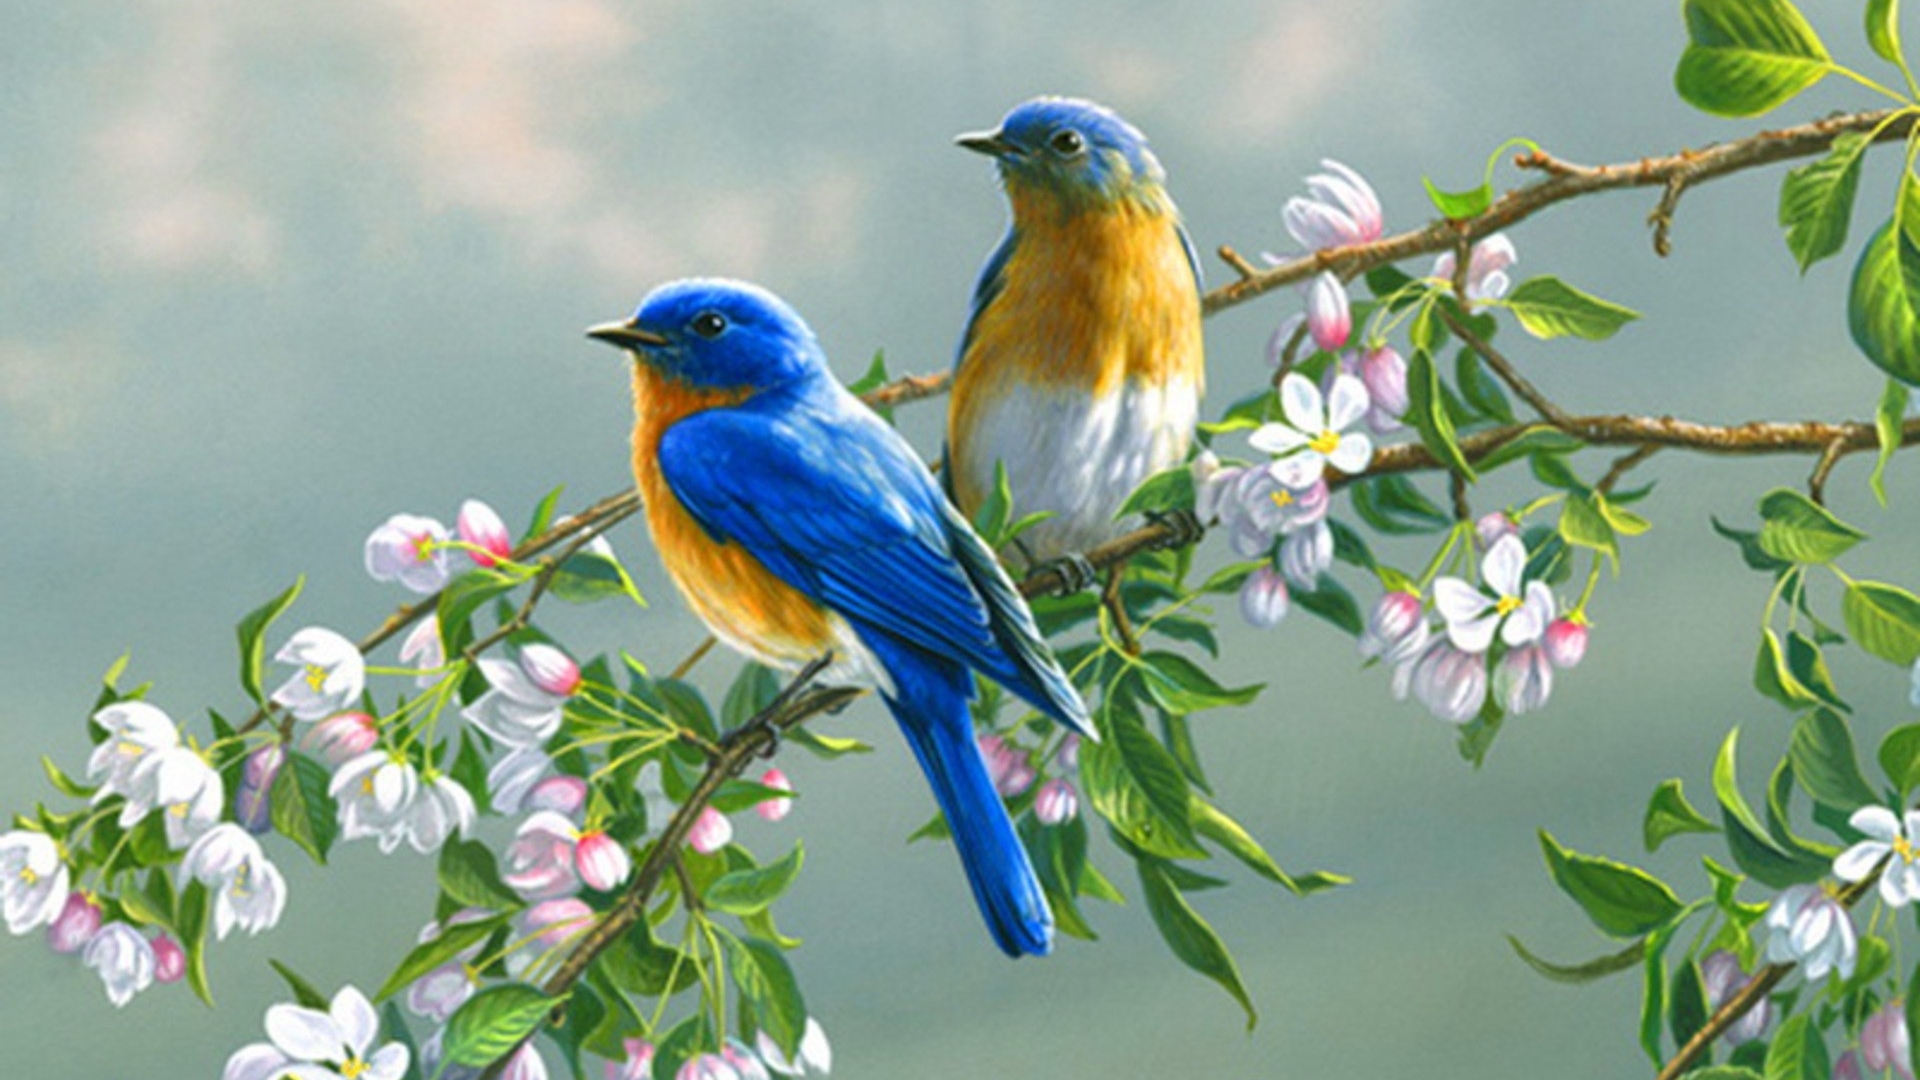 Couple of birds on Tree Branches HD Desktop Wallpaper Background